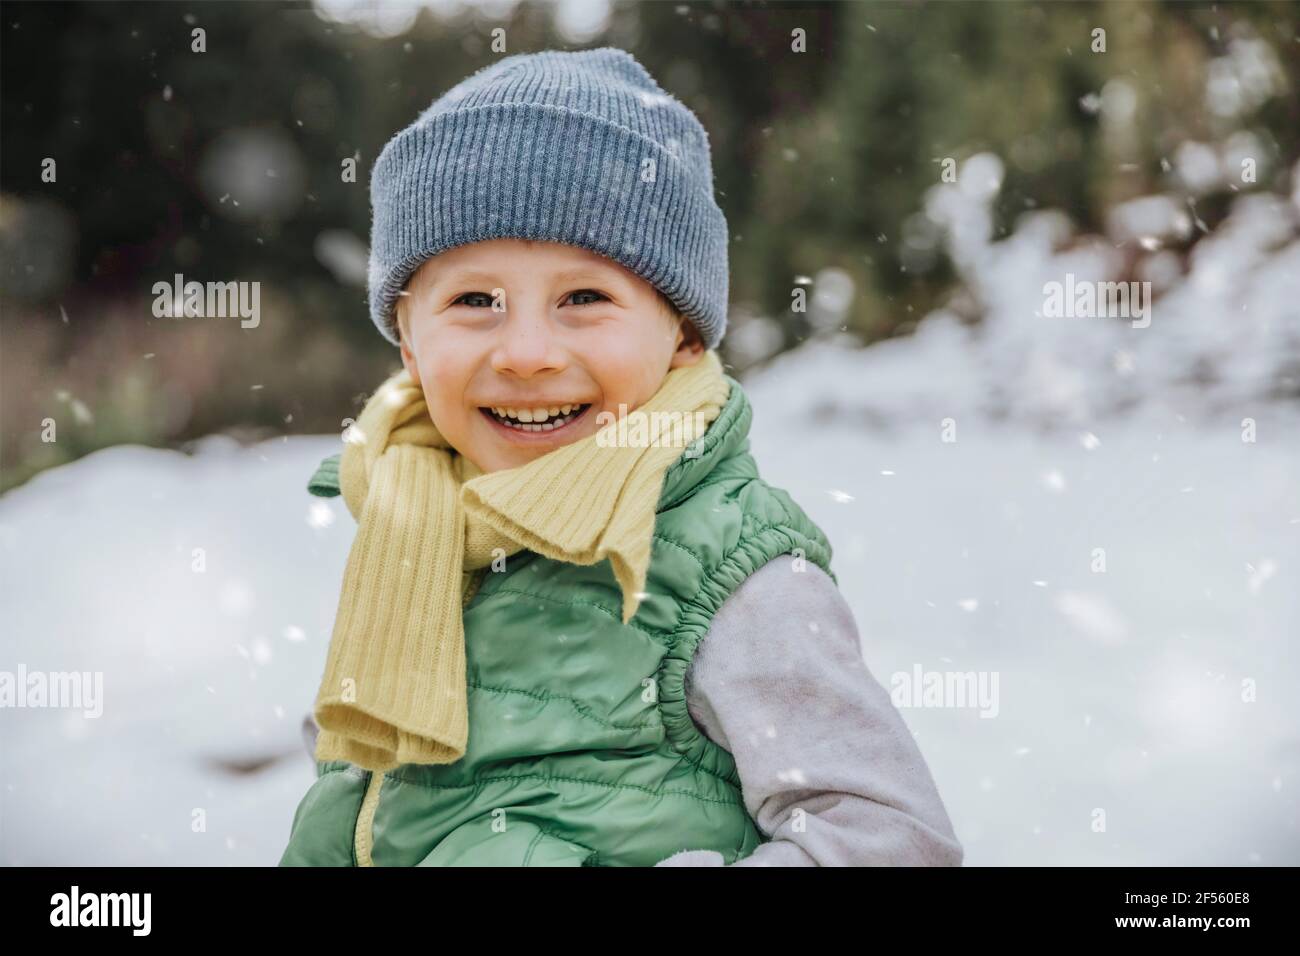 Smiling cute boy on snow covered land while snowing during winter Stock Photo